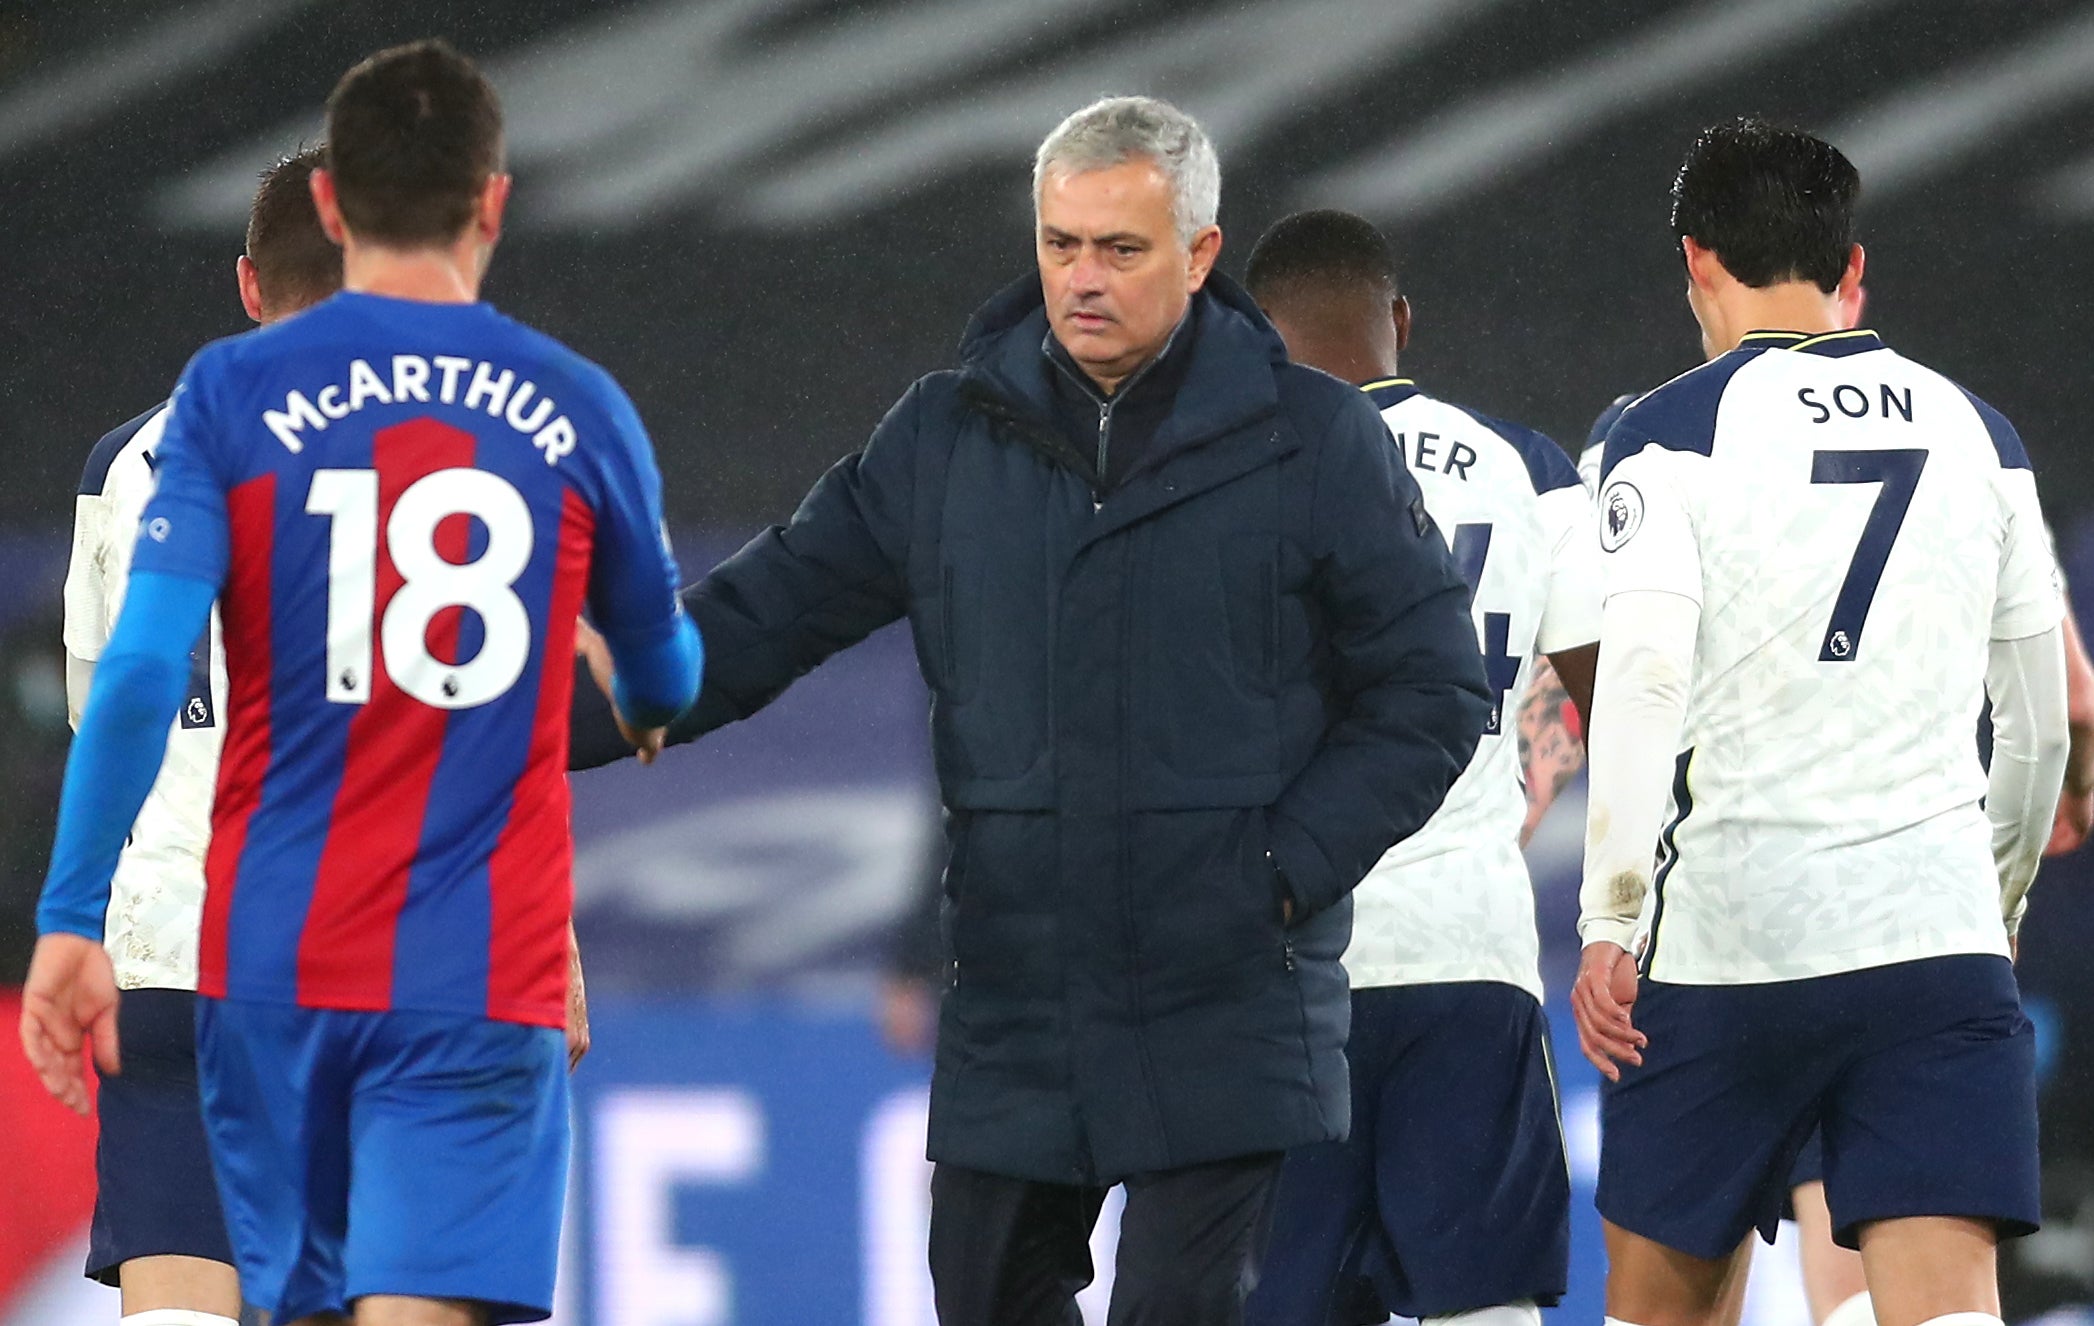 Jose Mourinho offered praise to Crystal Palace’s approach in the draw with his Tottenham side